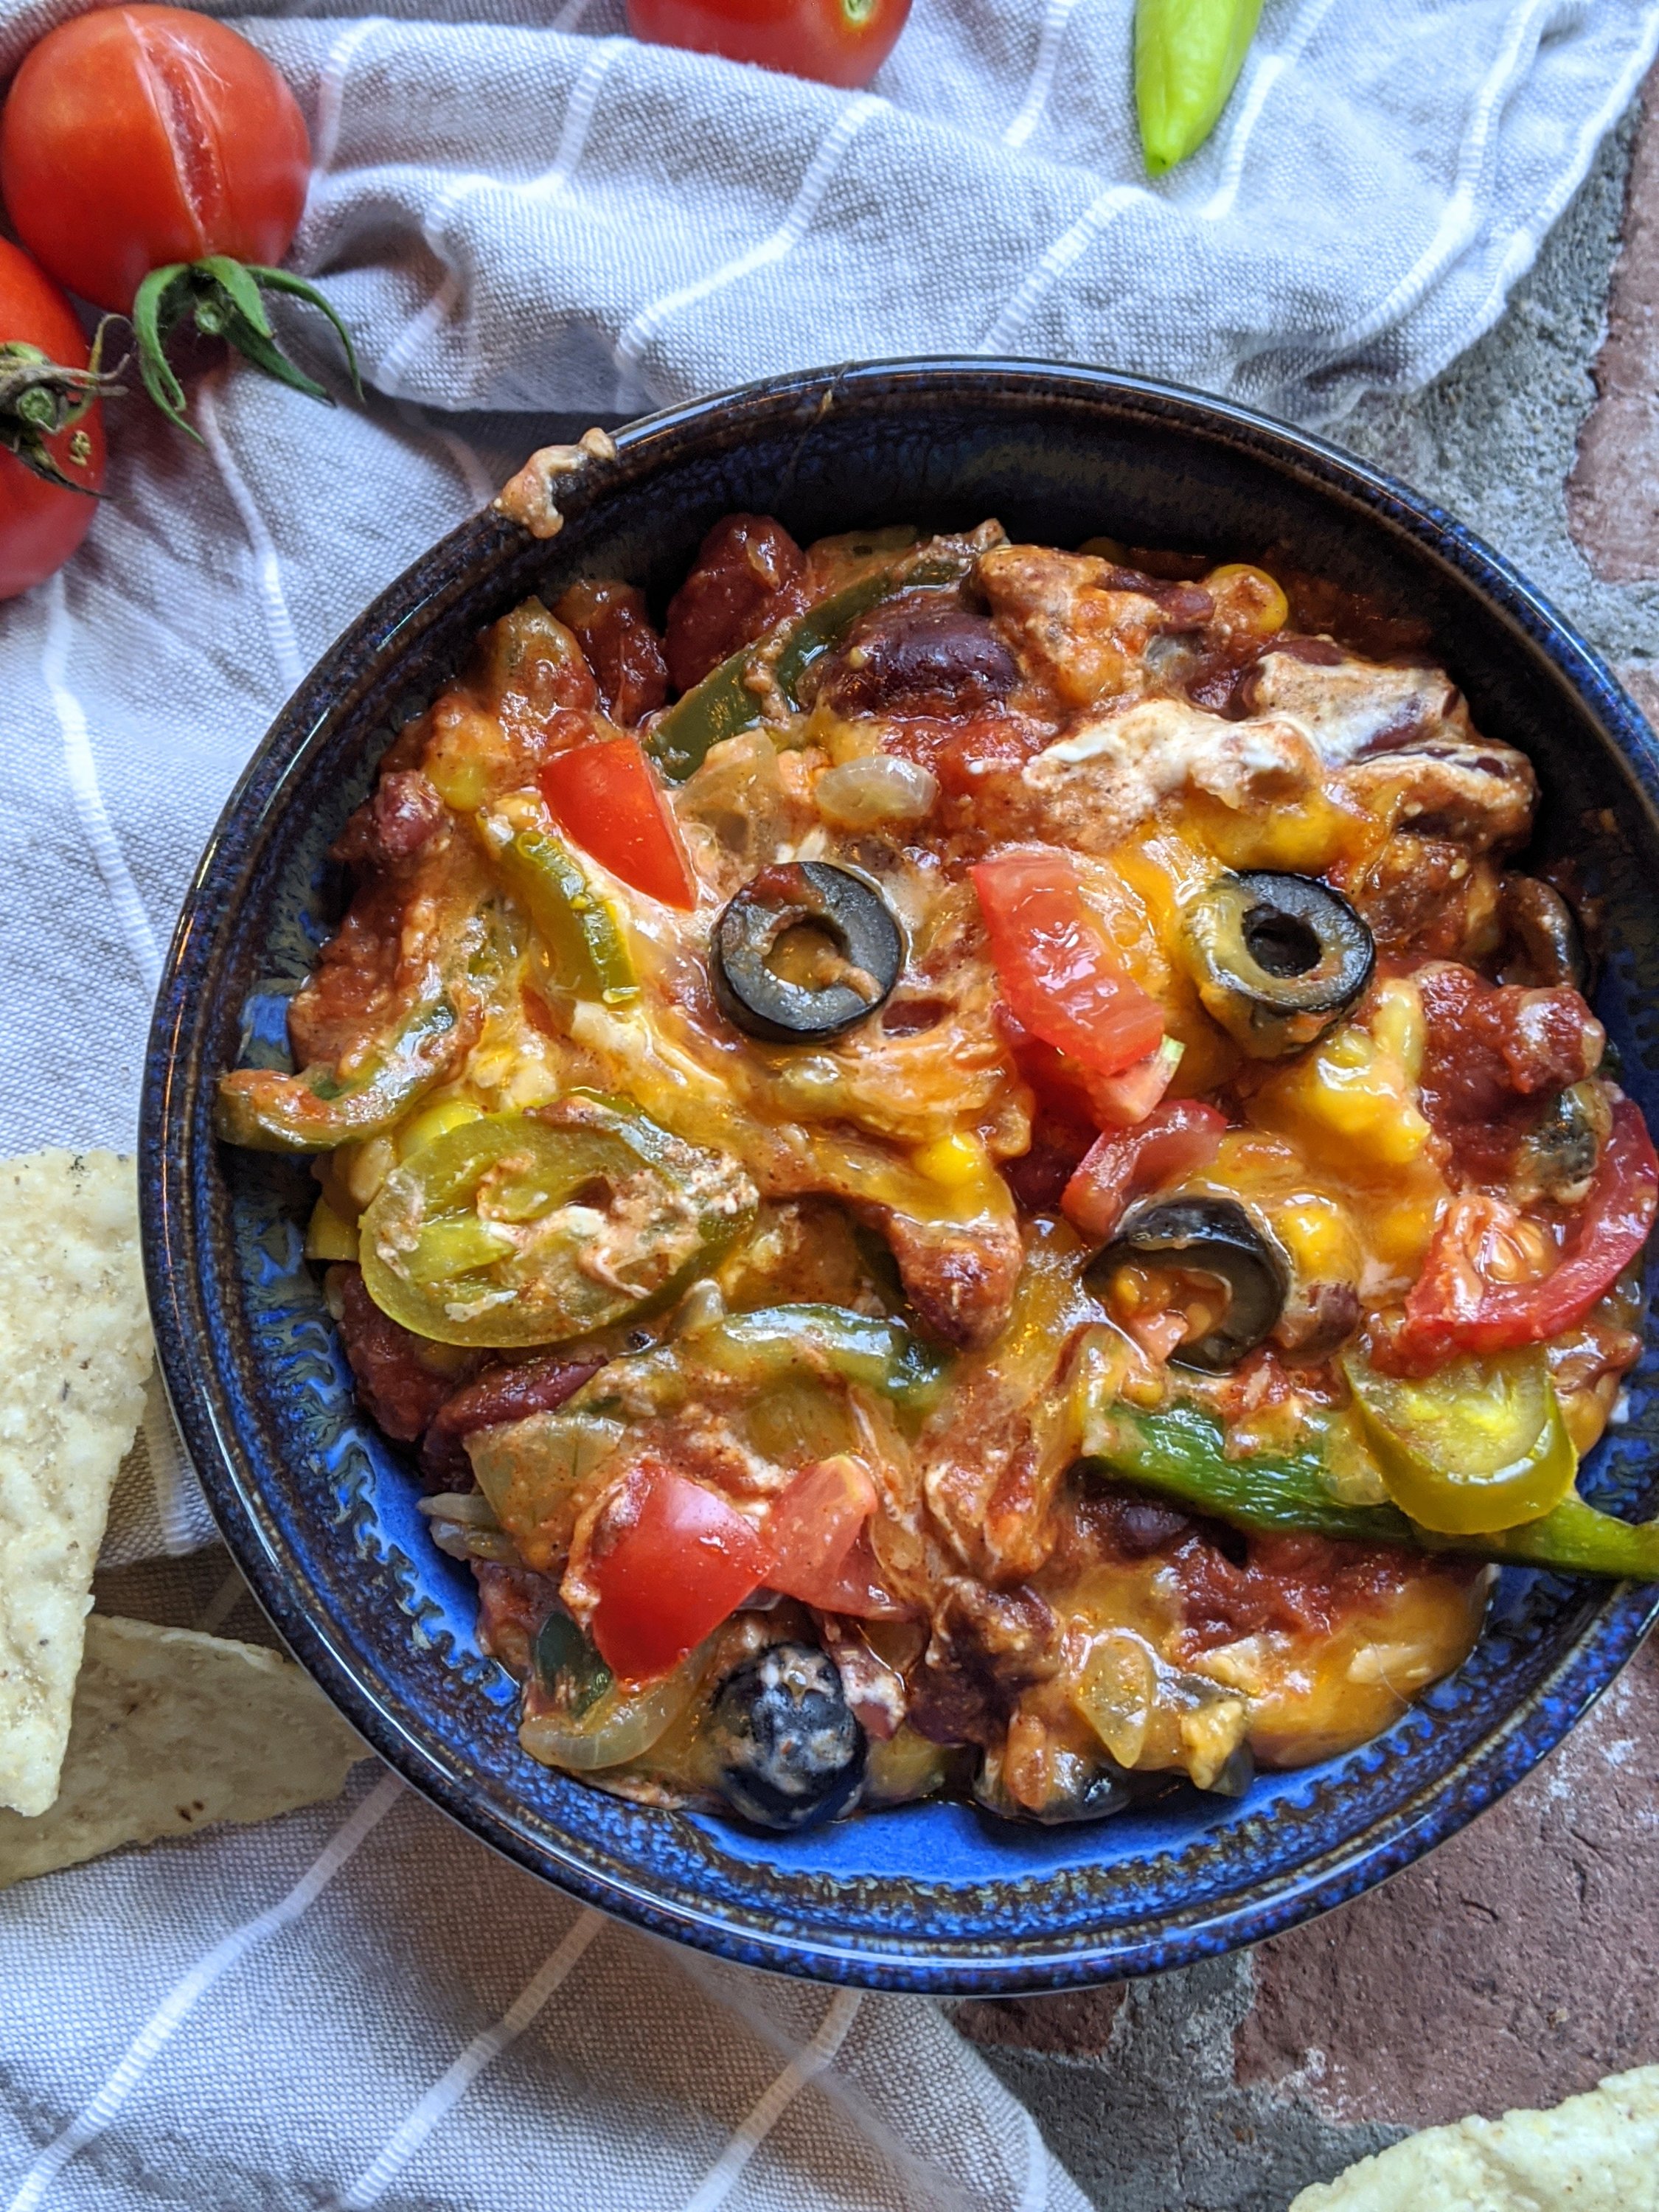 vegan 7 layer dip healthy high protein dairy free vegetarian gluten free dairy free loaded with vegetables olives jalapenos chili cream cheese salsa beans